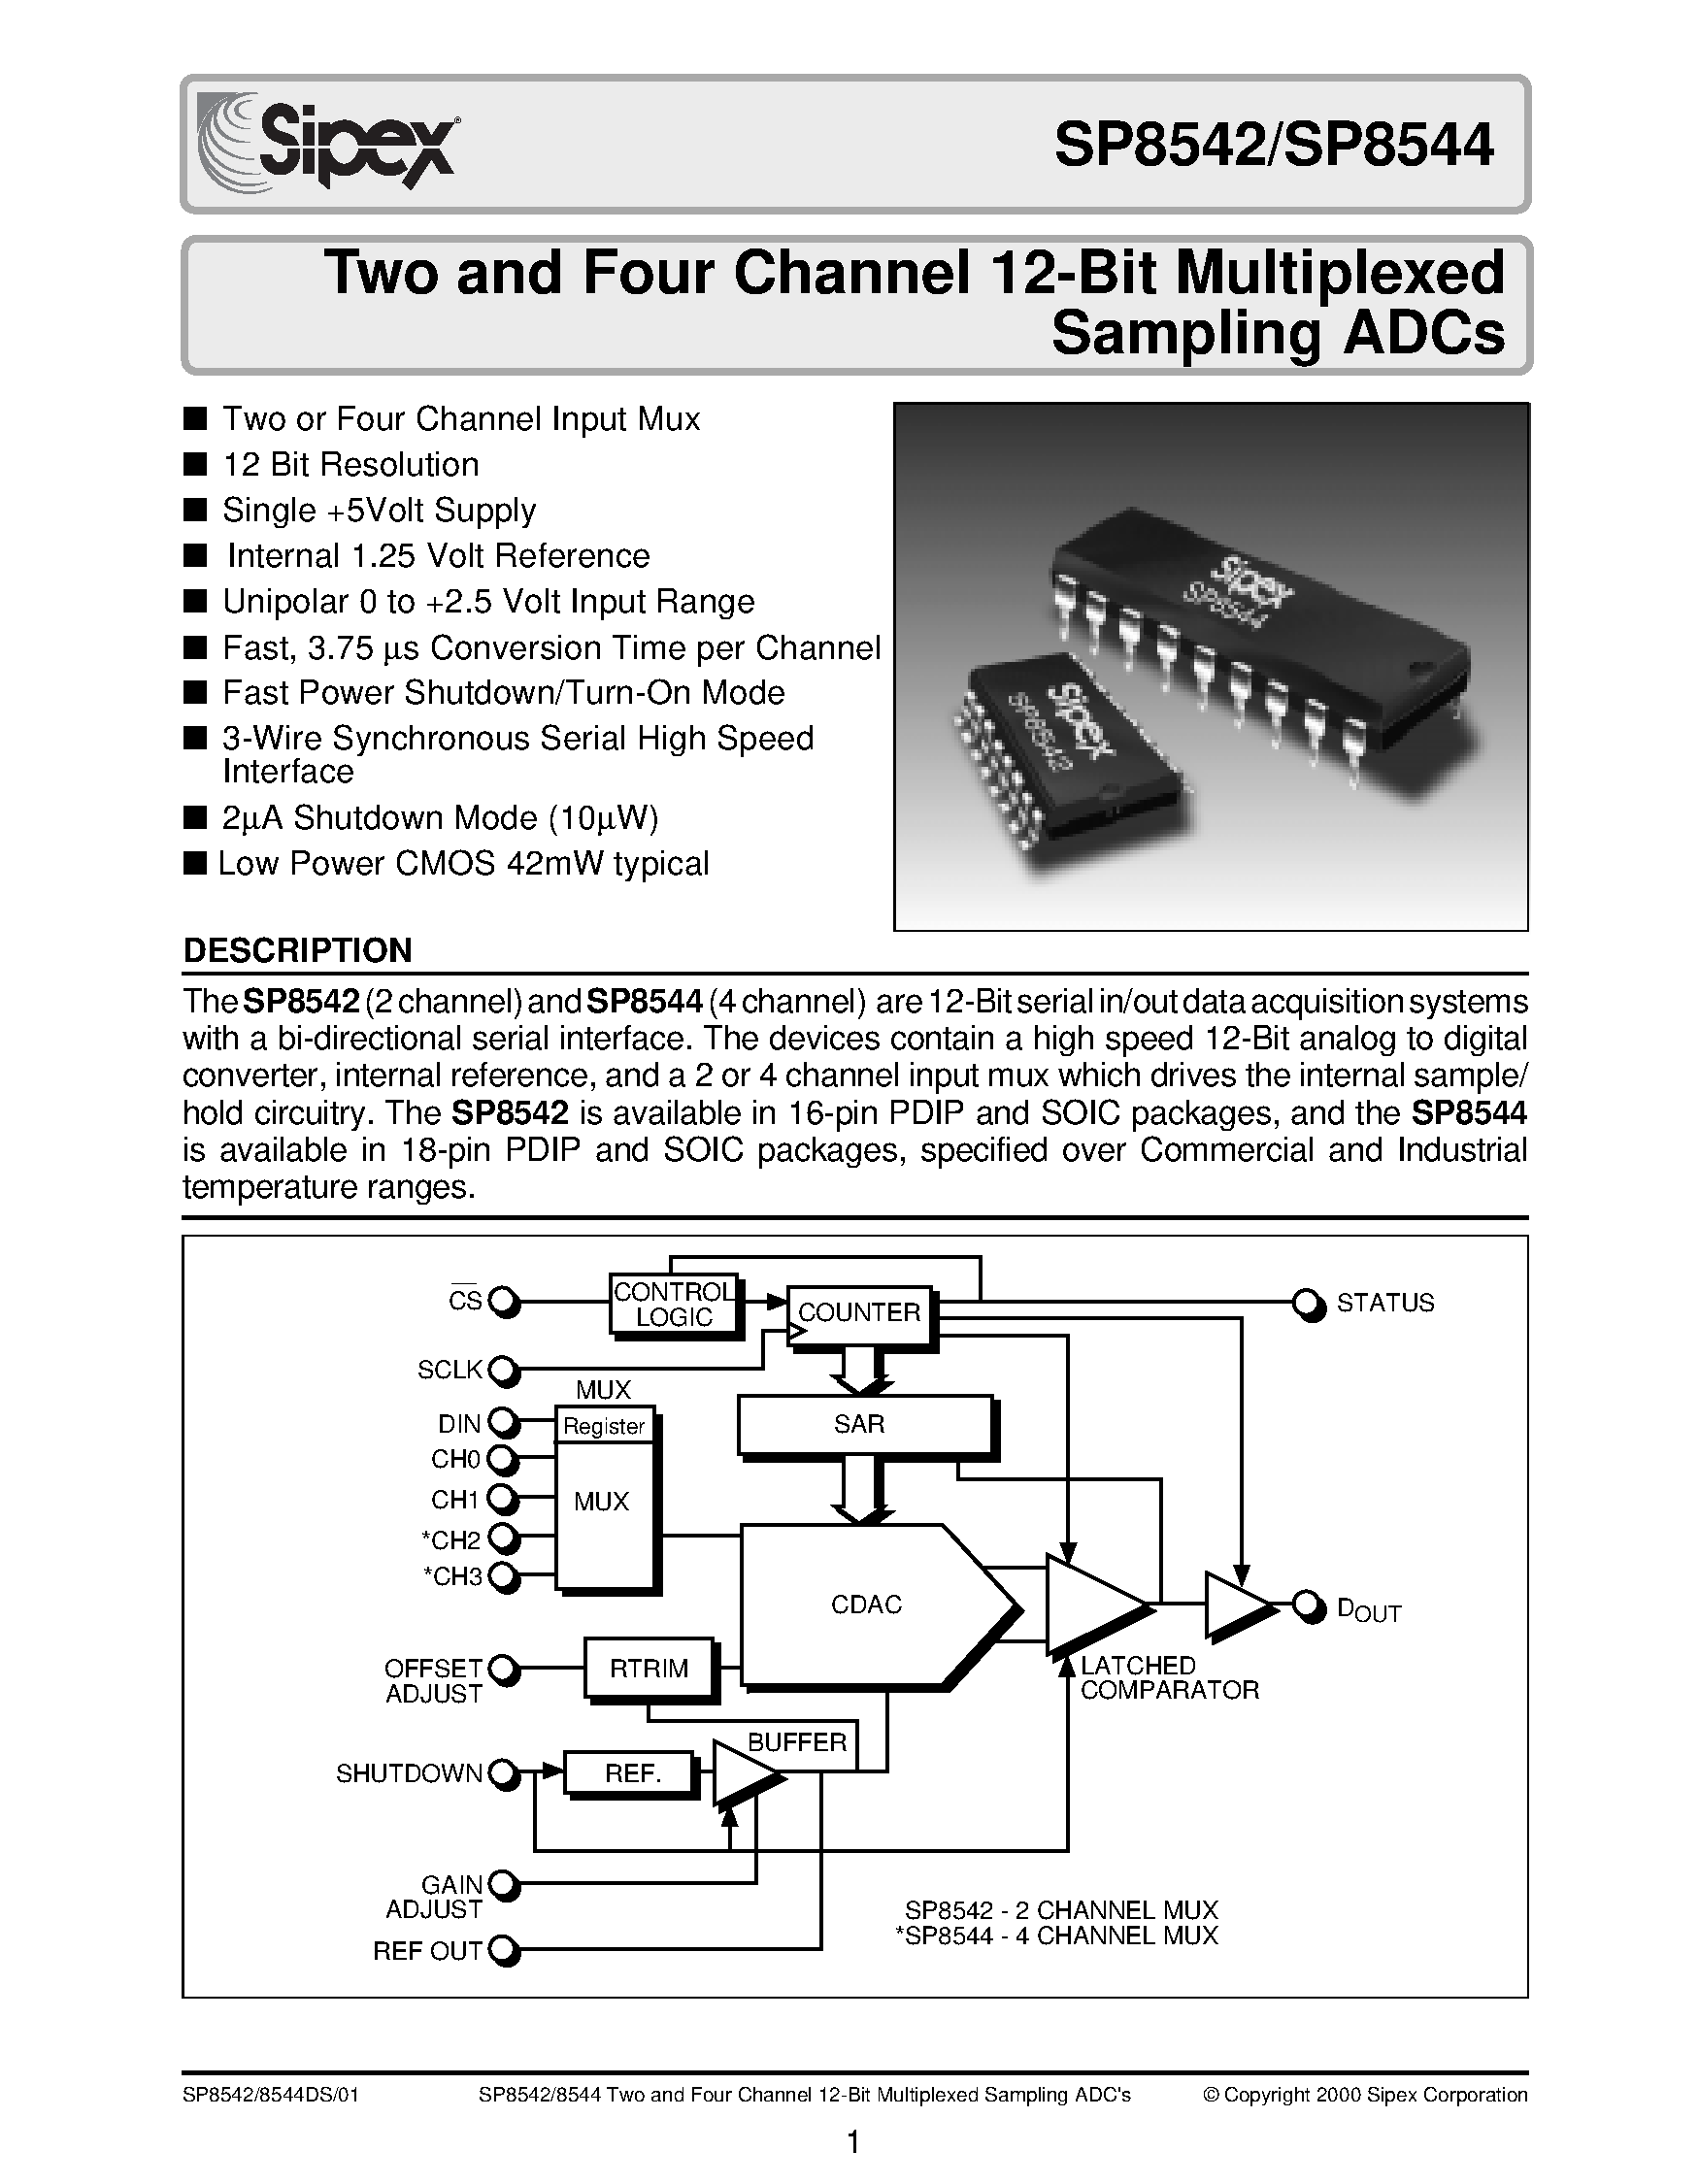 Datasheet SP8542JN - Two and Four Channel 12-Bit Multiplexed Sampling ADCs page 1